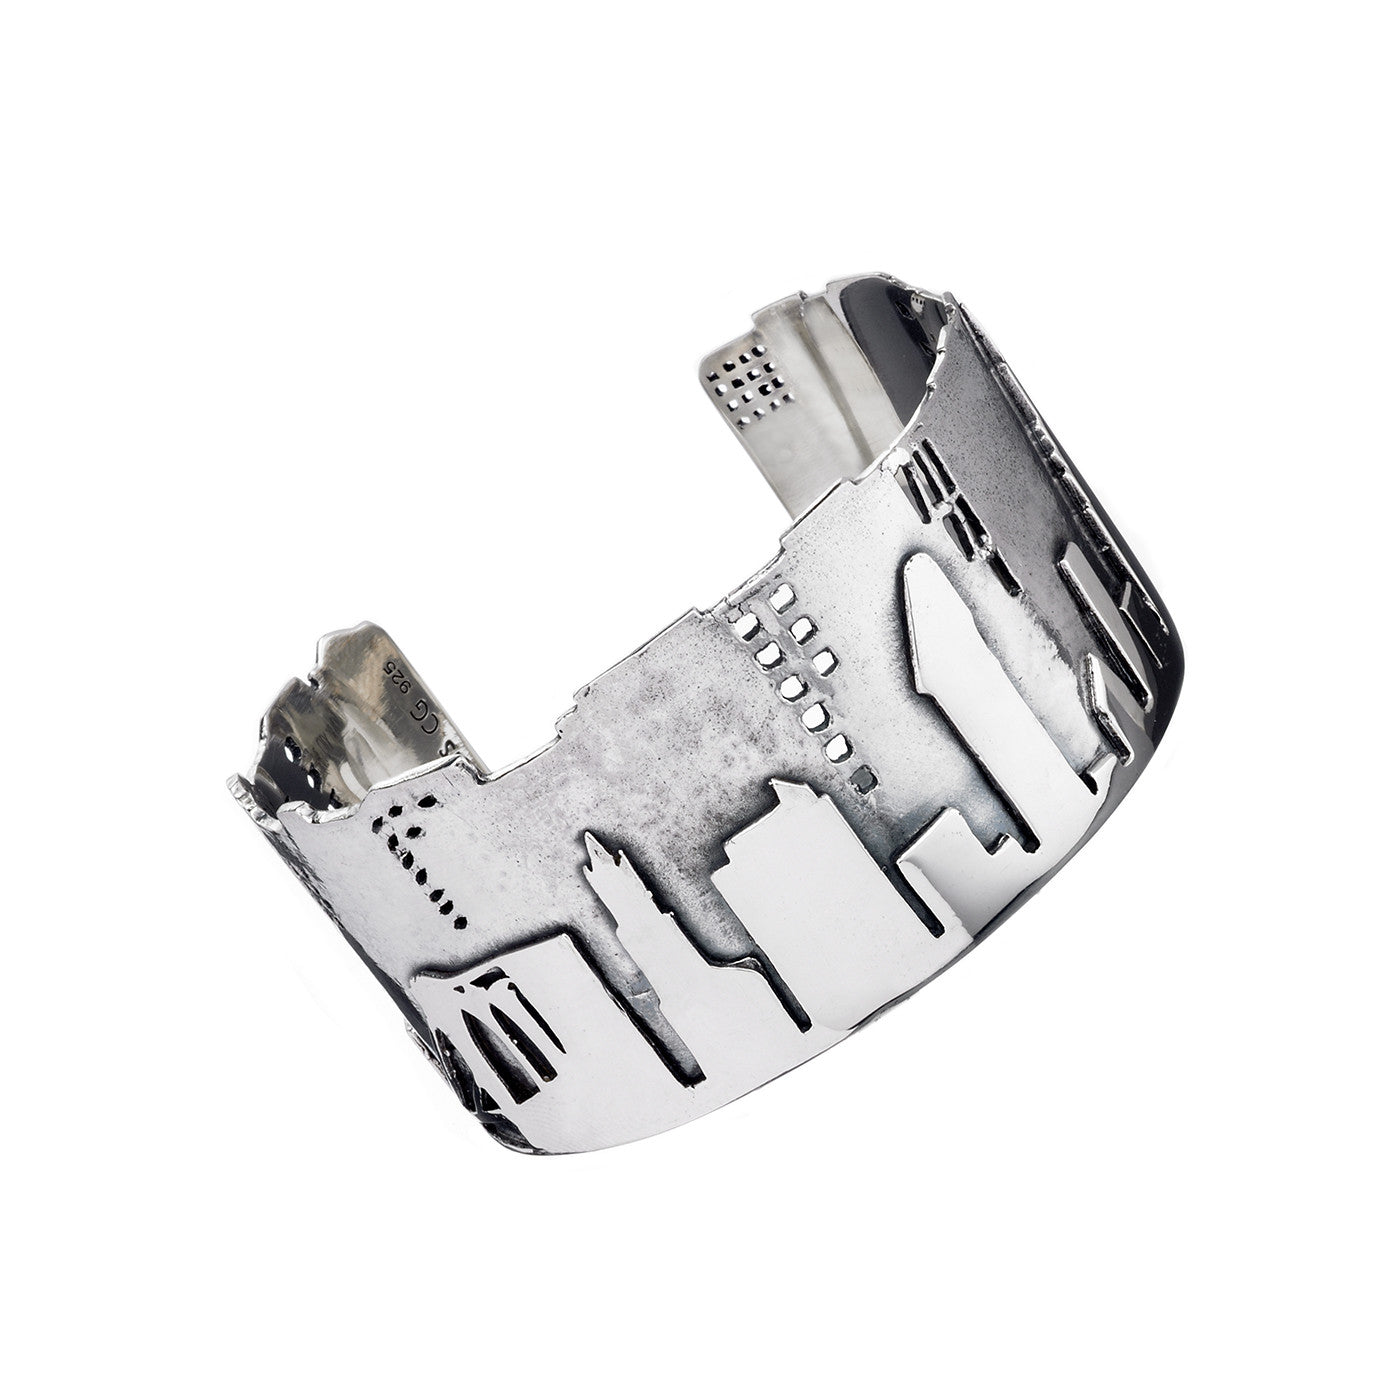 NYC Skyline The City That Never Sleeps Sterling Silver Bracelet Cuff - Cynthia Gale New York - 1